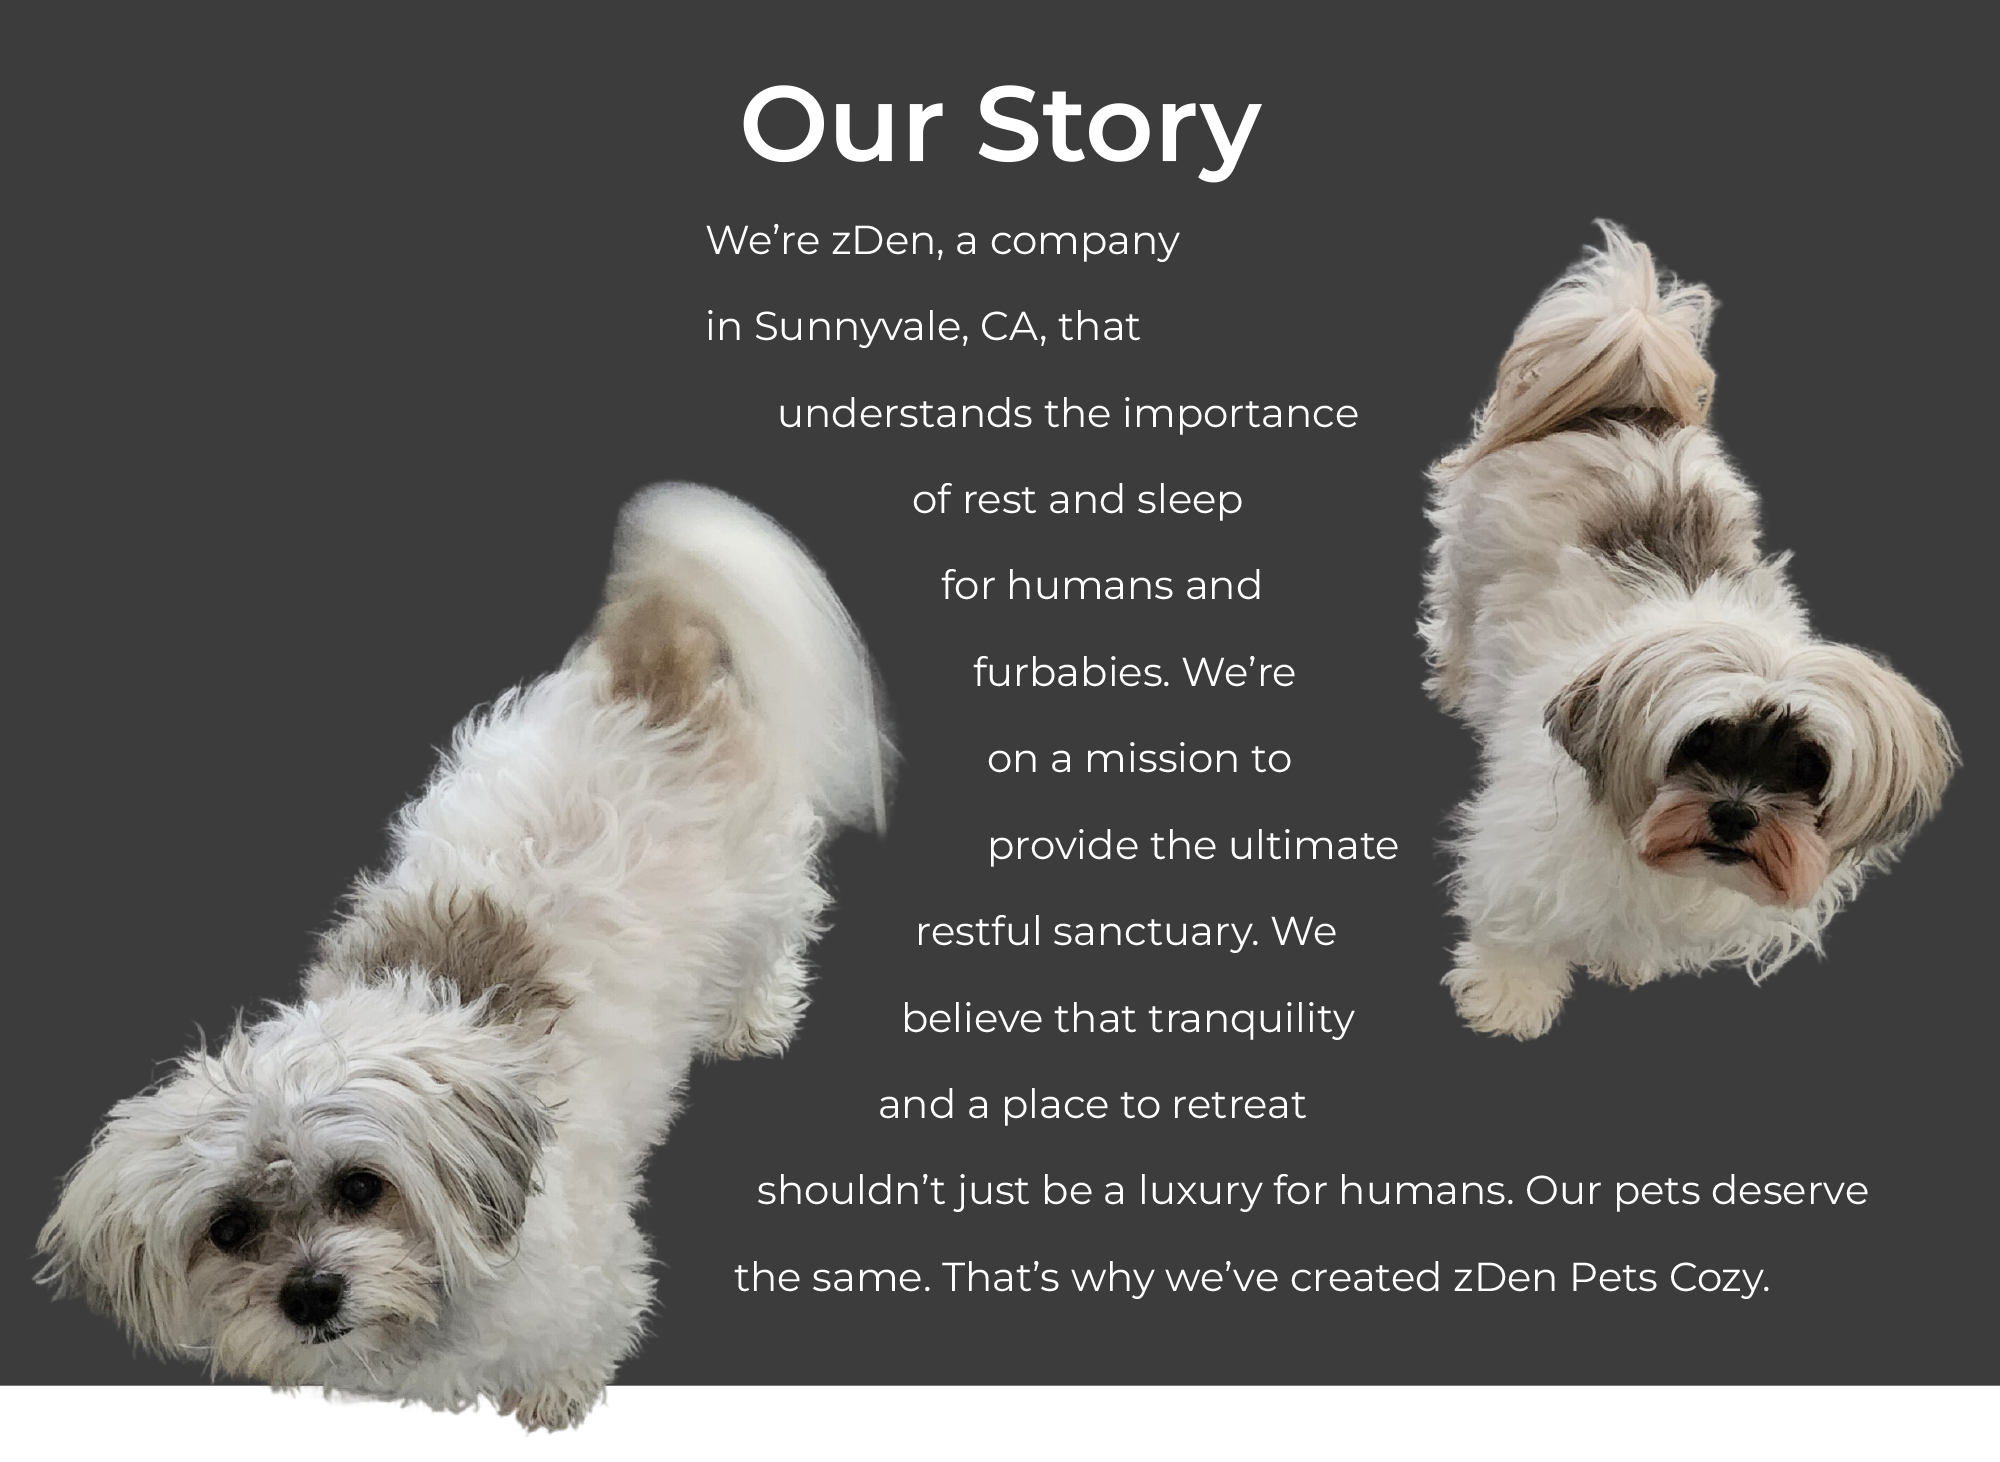 We’re zDen, a company in Sunnyvale, CA, that understands the importance of rest and sleep for humans and furbabies. We’re on a mission to provide the ultimate restful sanctuary. We believe that tranquility and a place to retreat shouldn’t just be a luxury for humans. Our pets deserve the same. That’s why we’ve created zDen Pets Cozy.